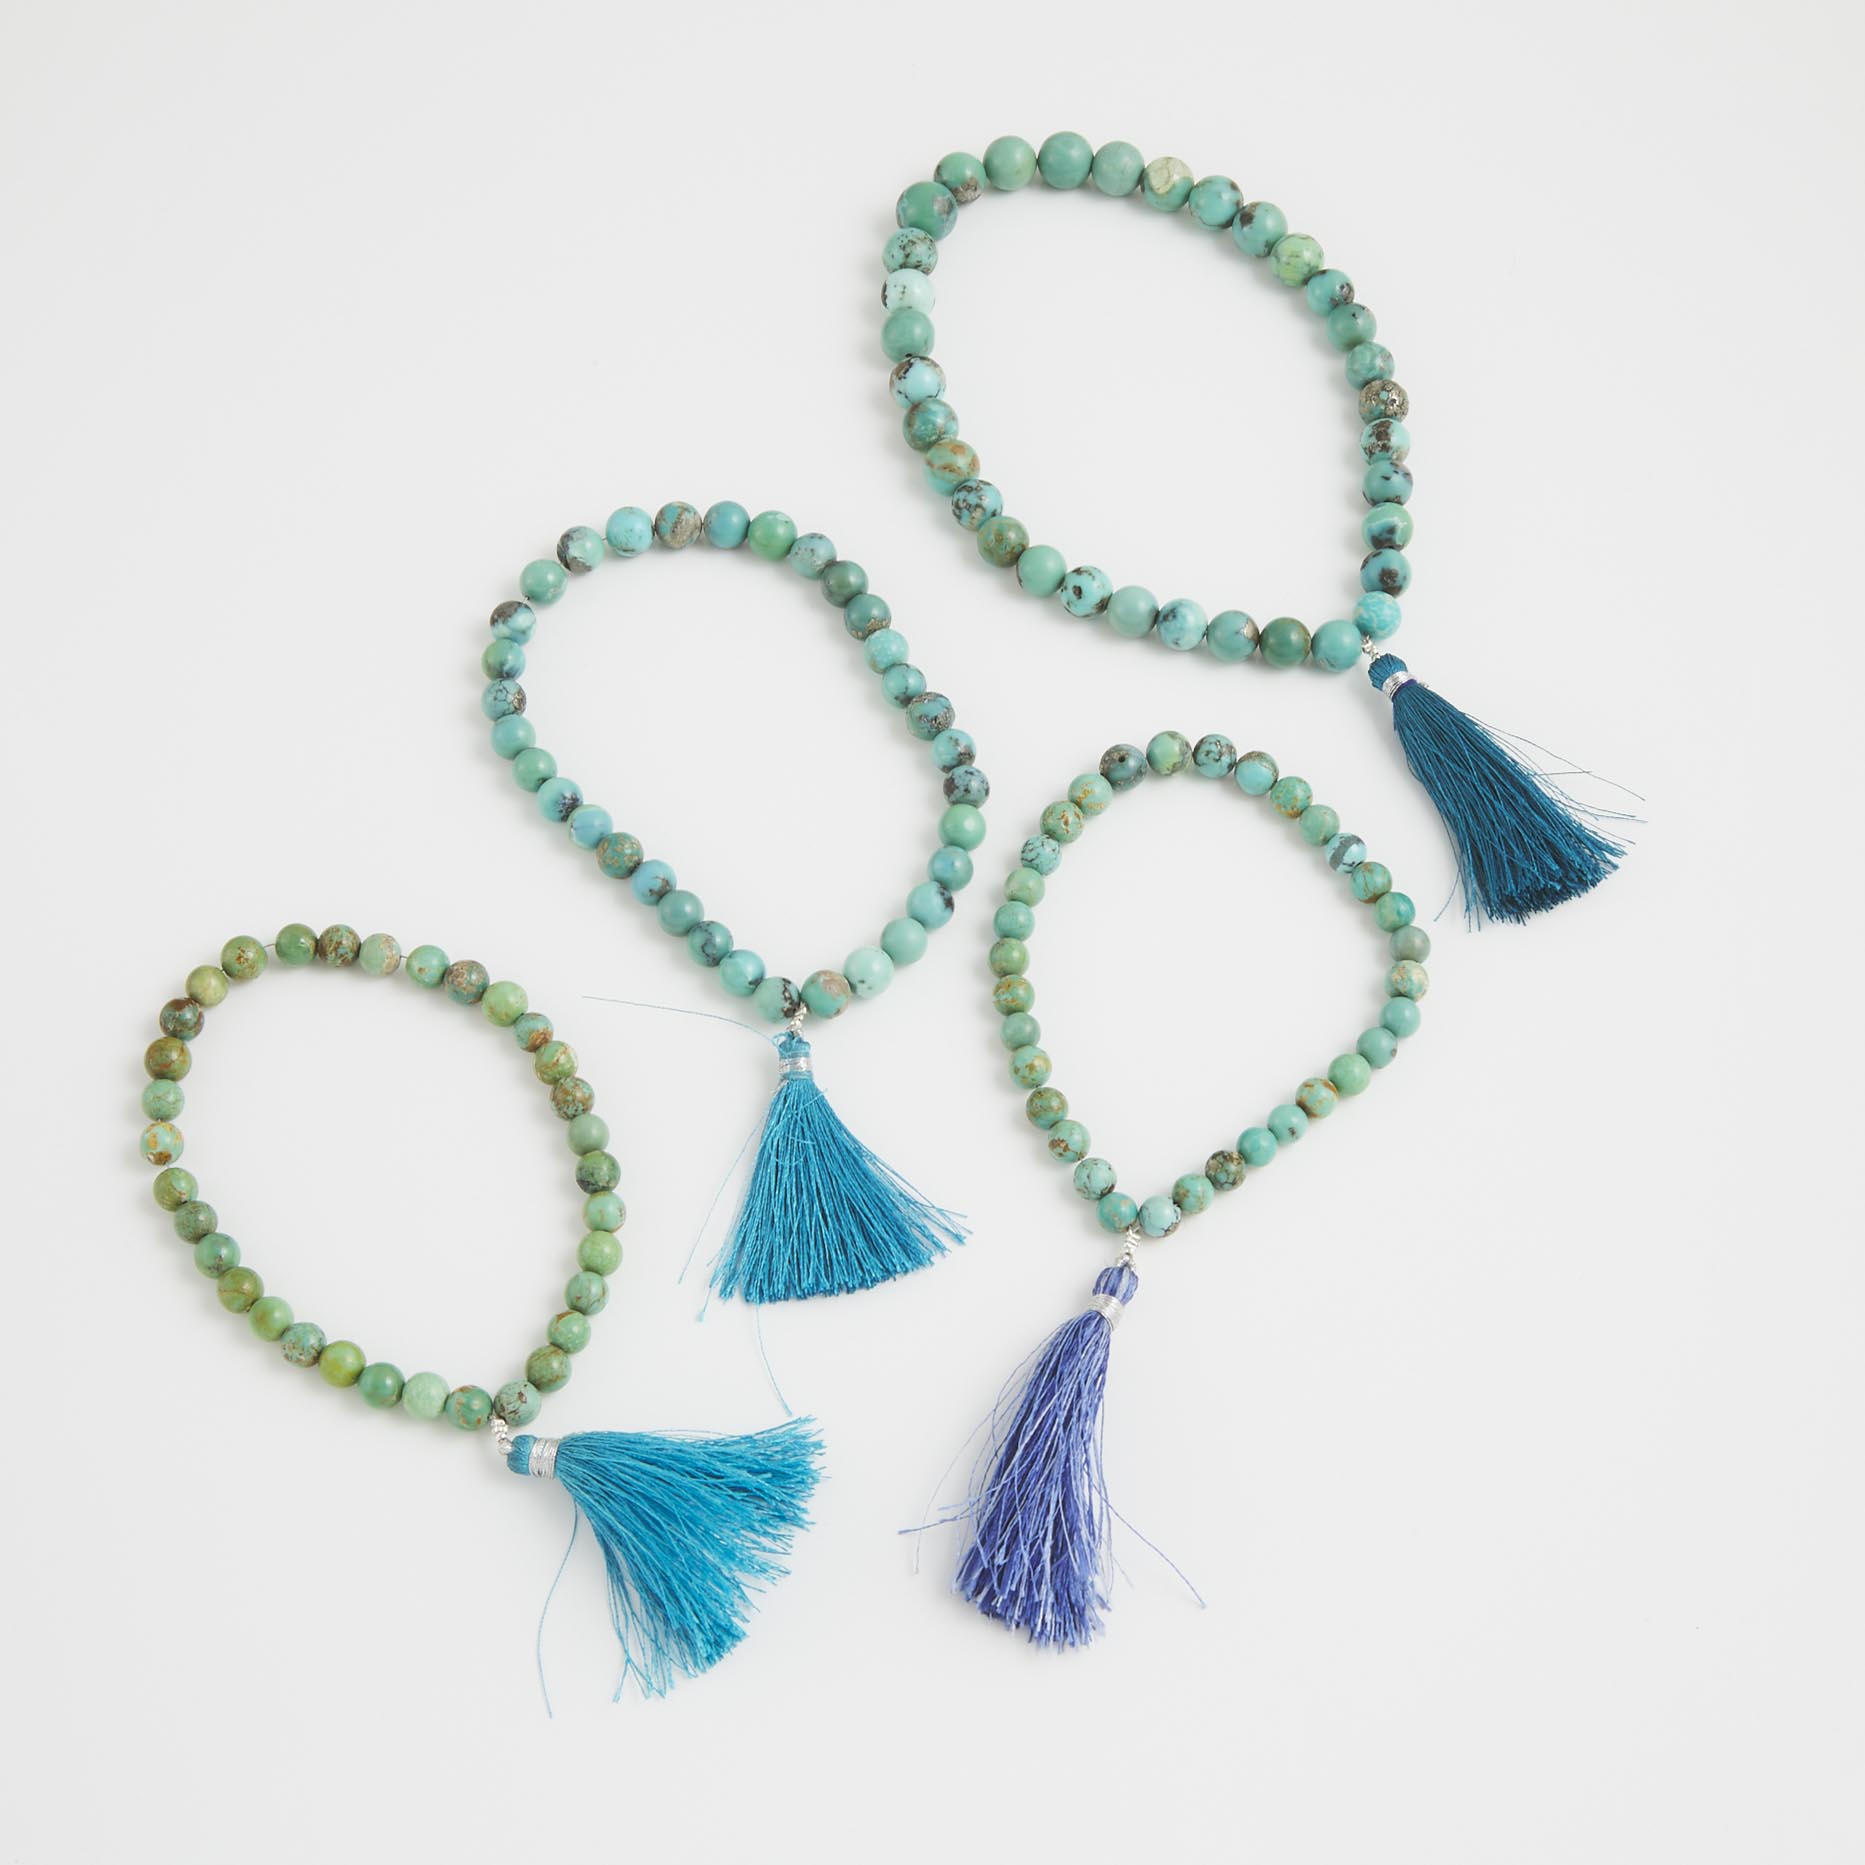 4 Strands Of Turquoise Beads